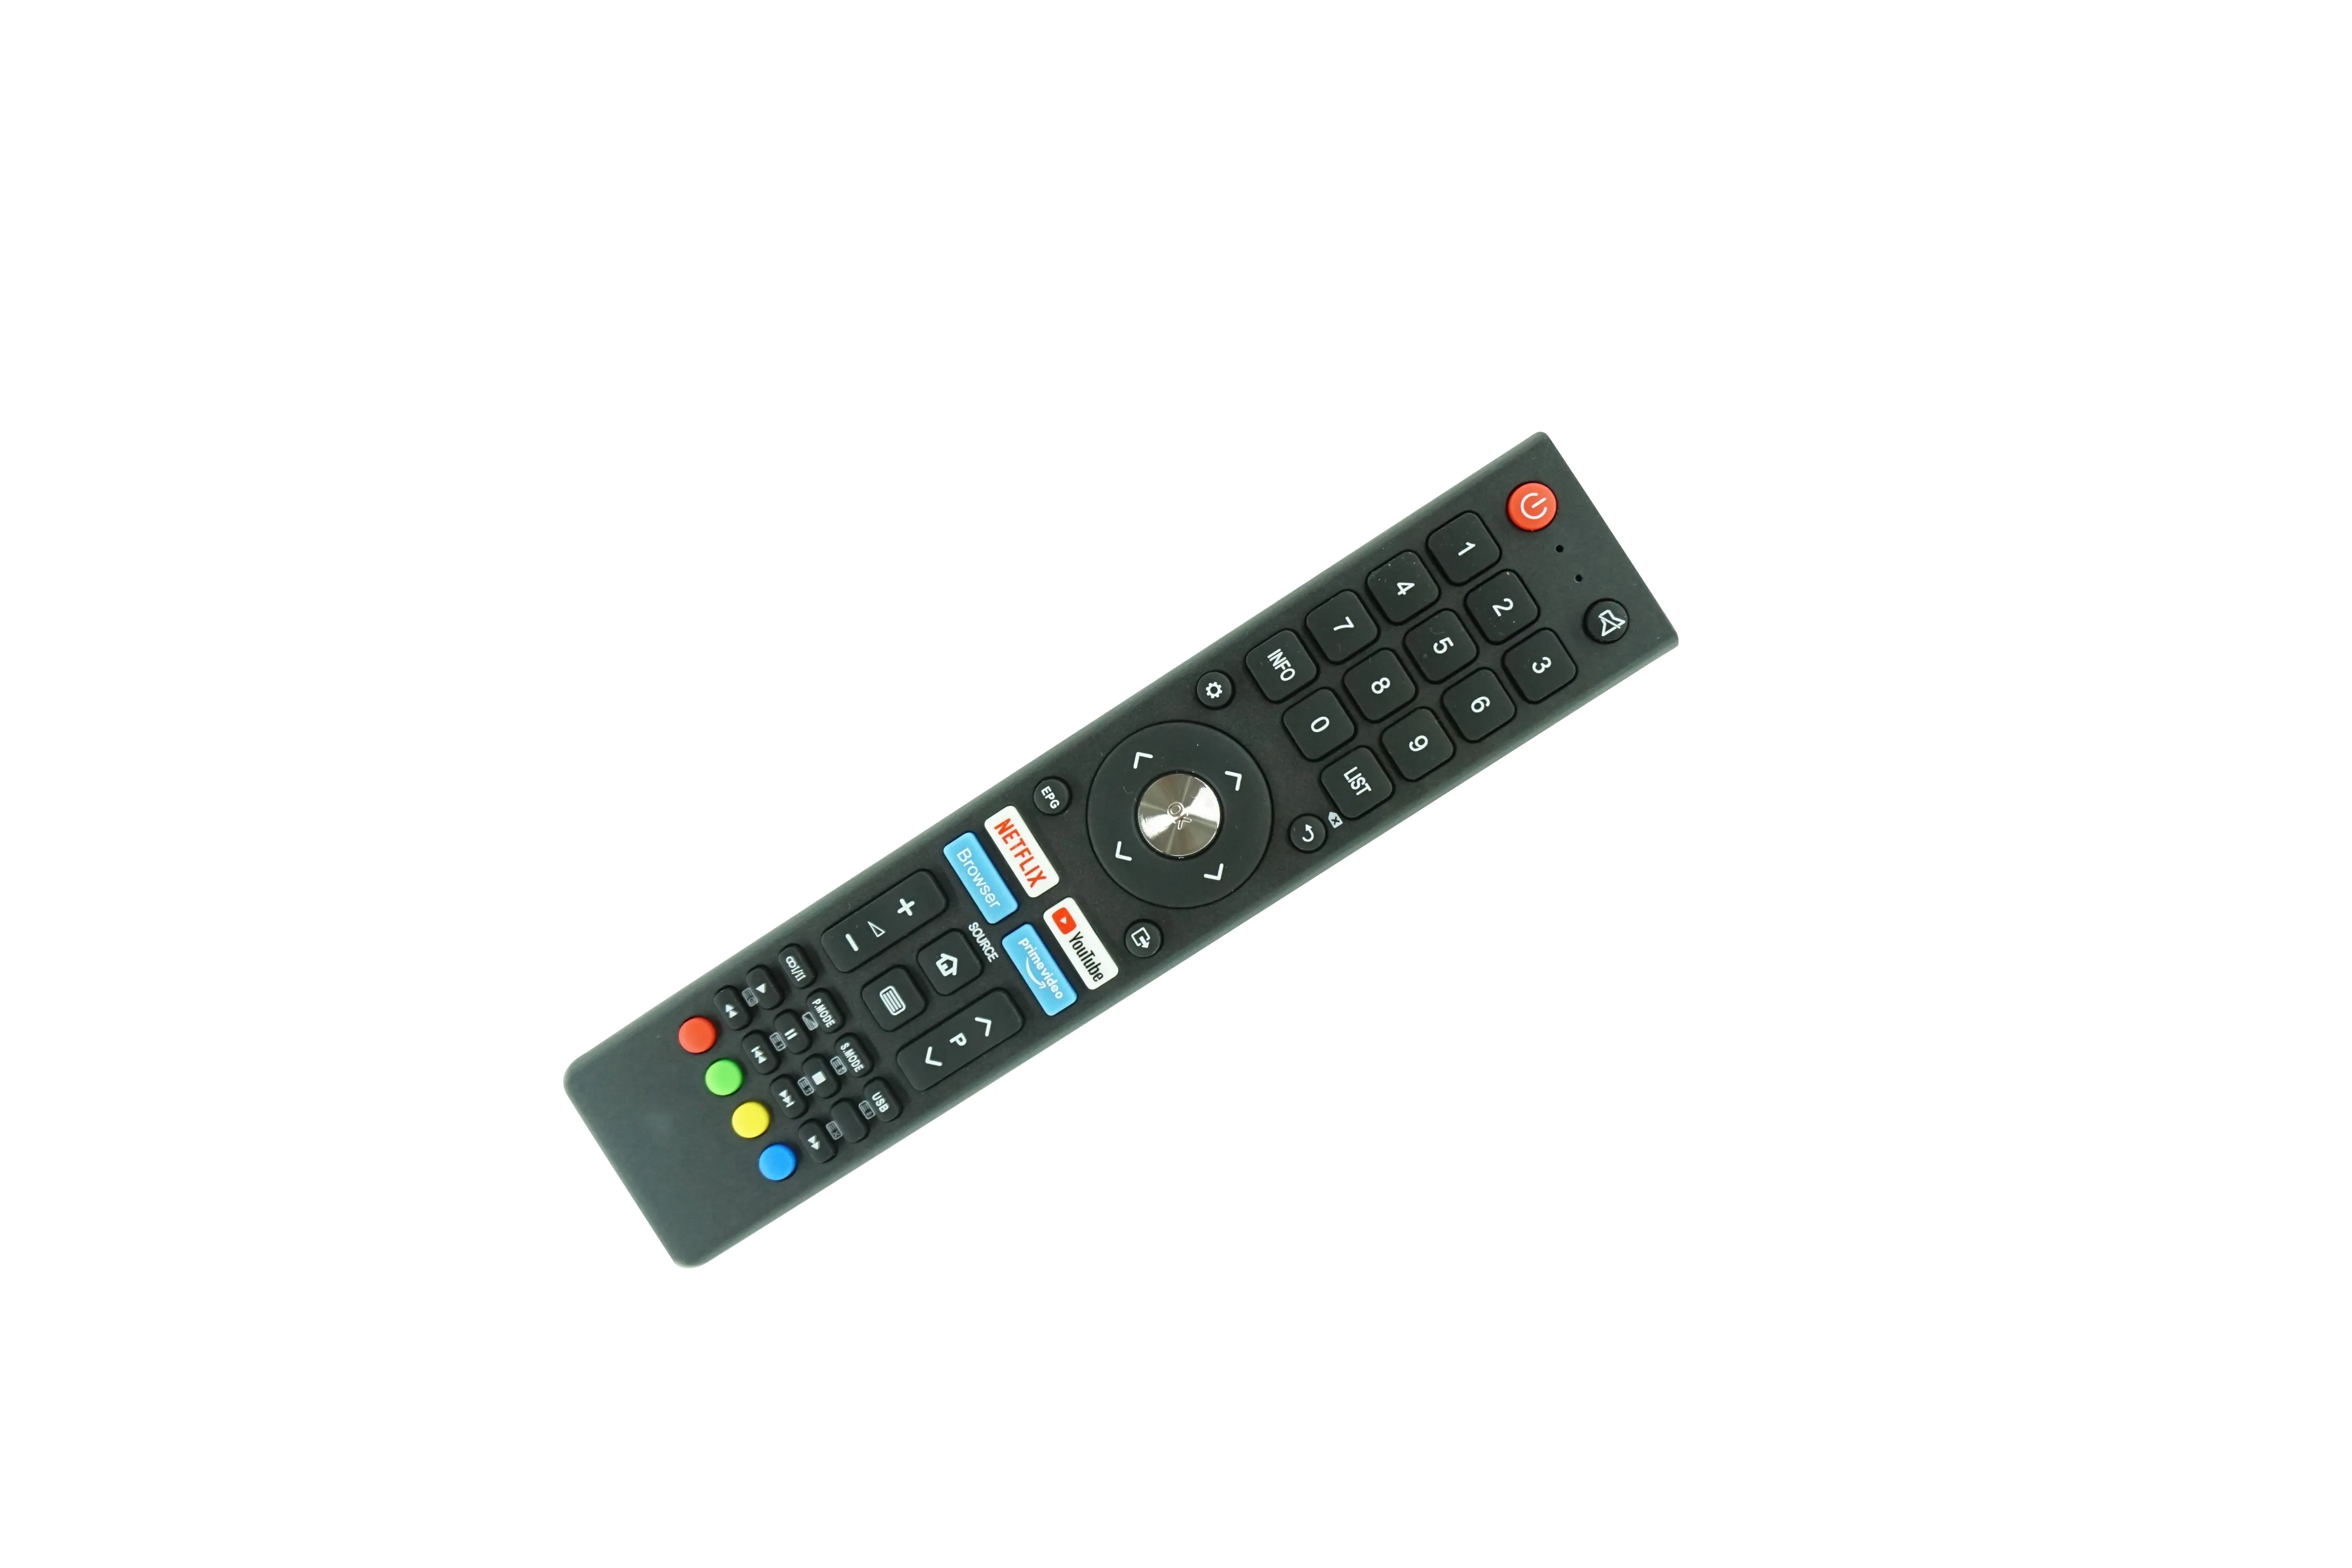 Remote Control For NEUFUNK NK43G6SGFHD NK50G6SGUHD & JVC RM-C3362 RM-C3367 RM-C3407 LT-32N3115A LT-40N5115A LT-50N7115A LT-55N7115A LT-65N7115A Smart LCD HDTV Android TV